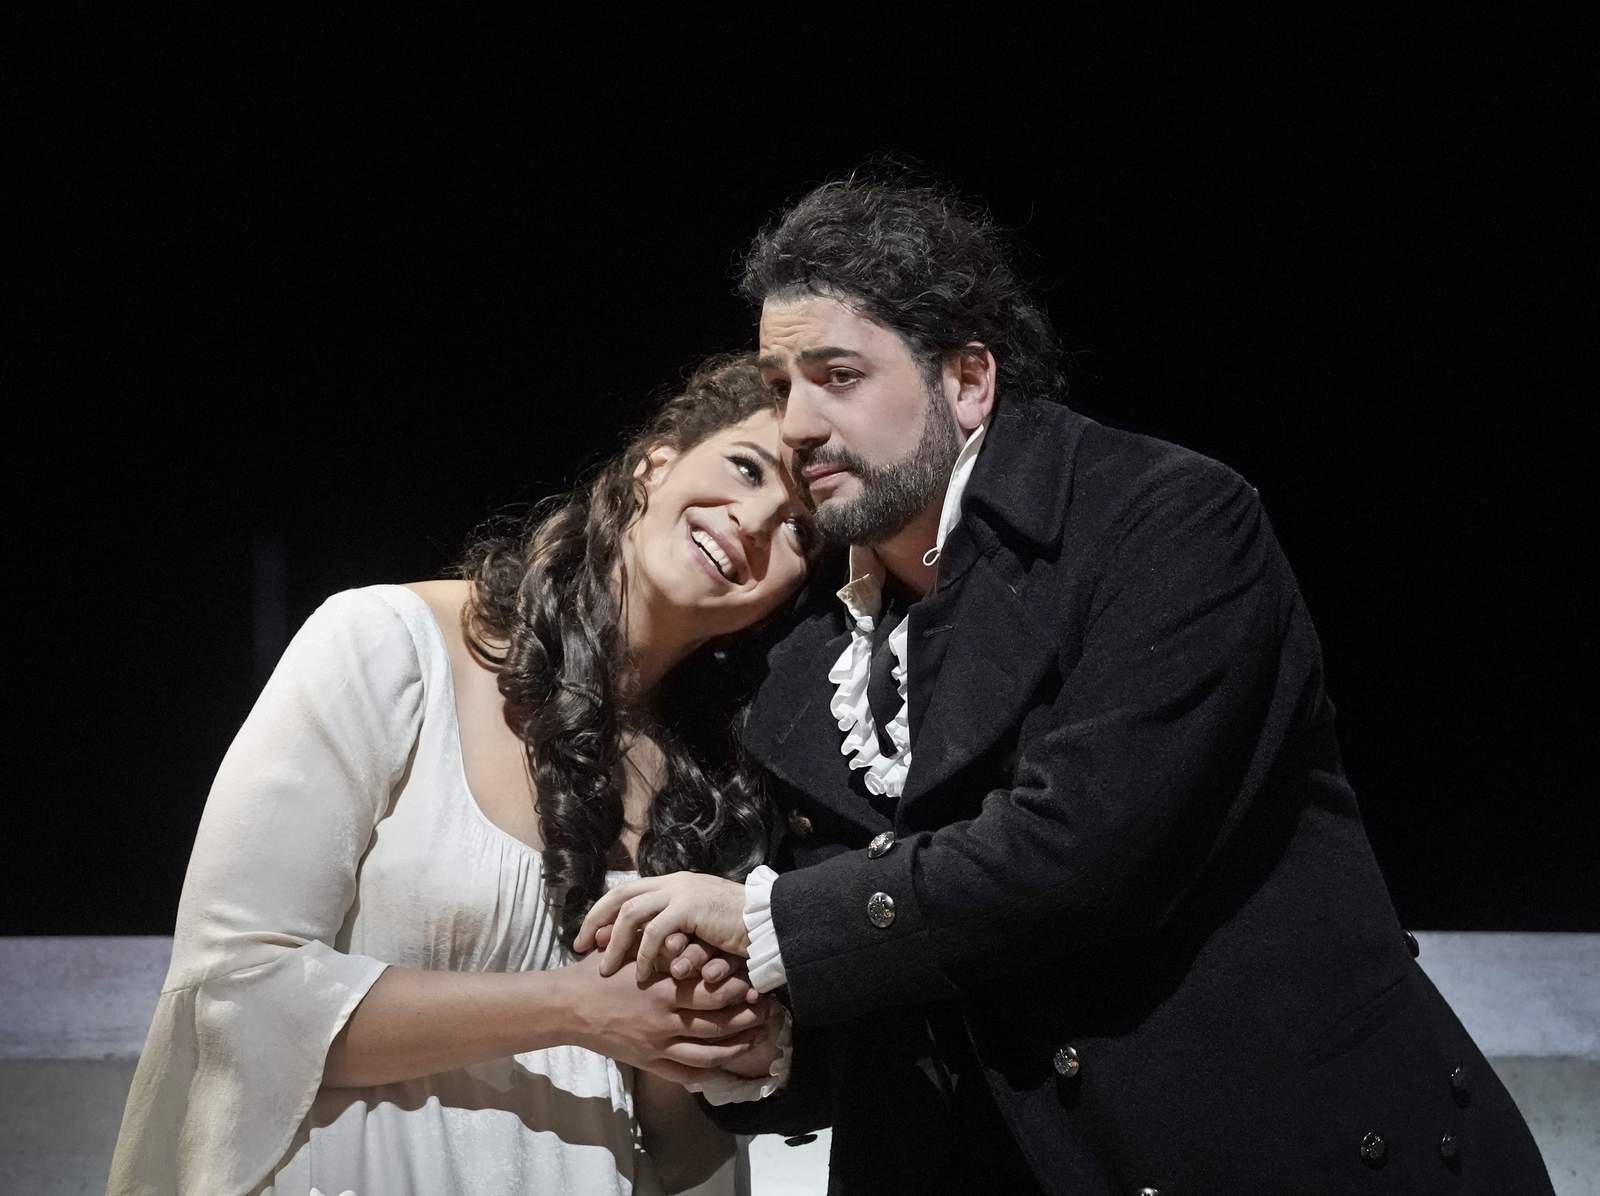 Tenor moves out of Anna Netrebko's shadow